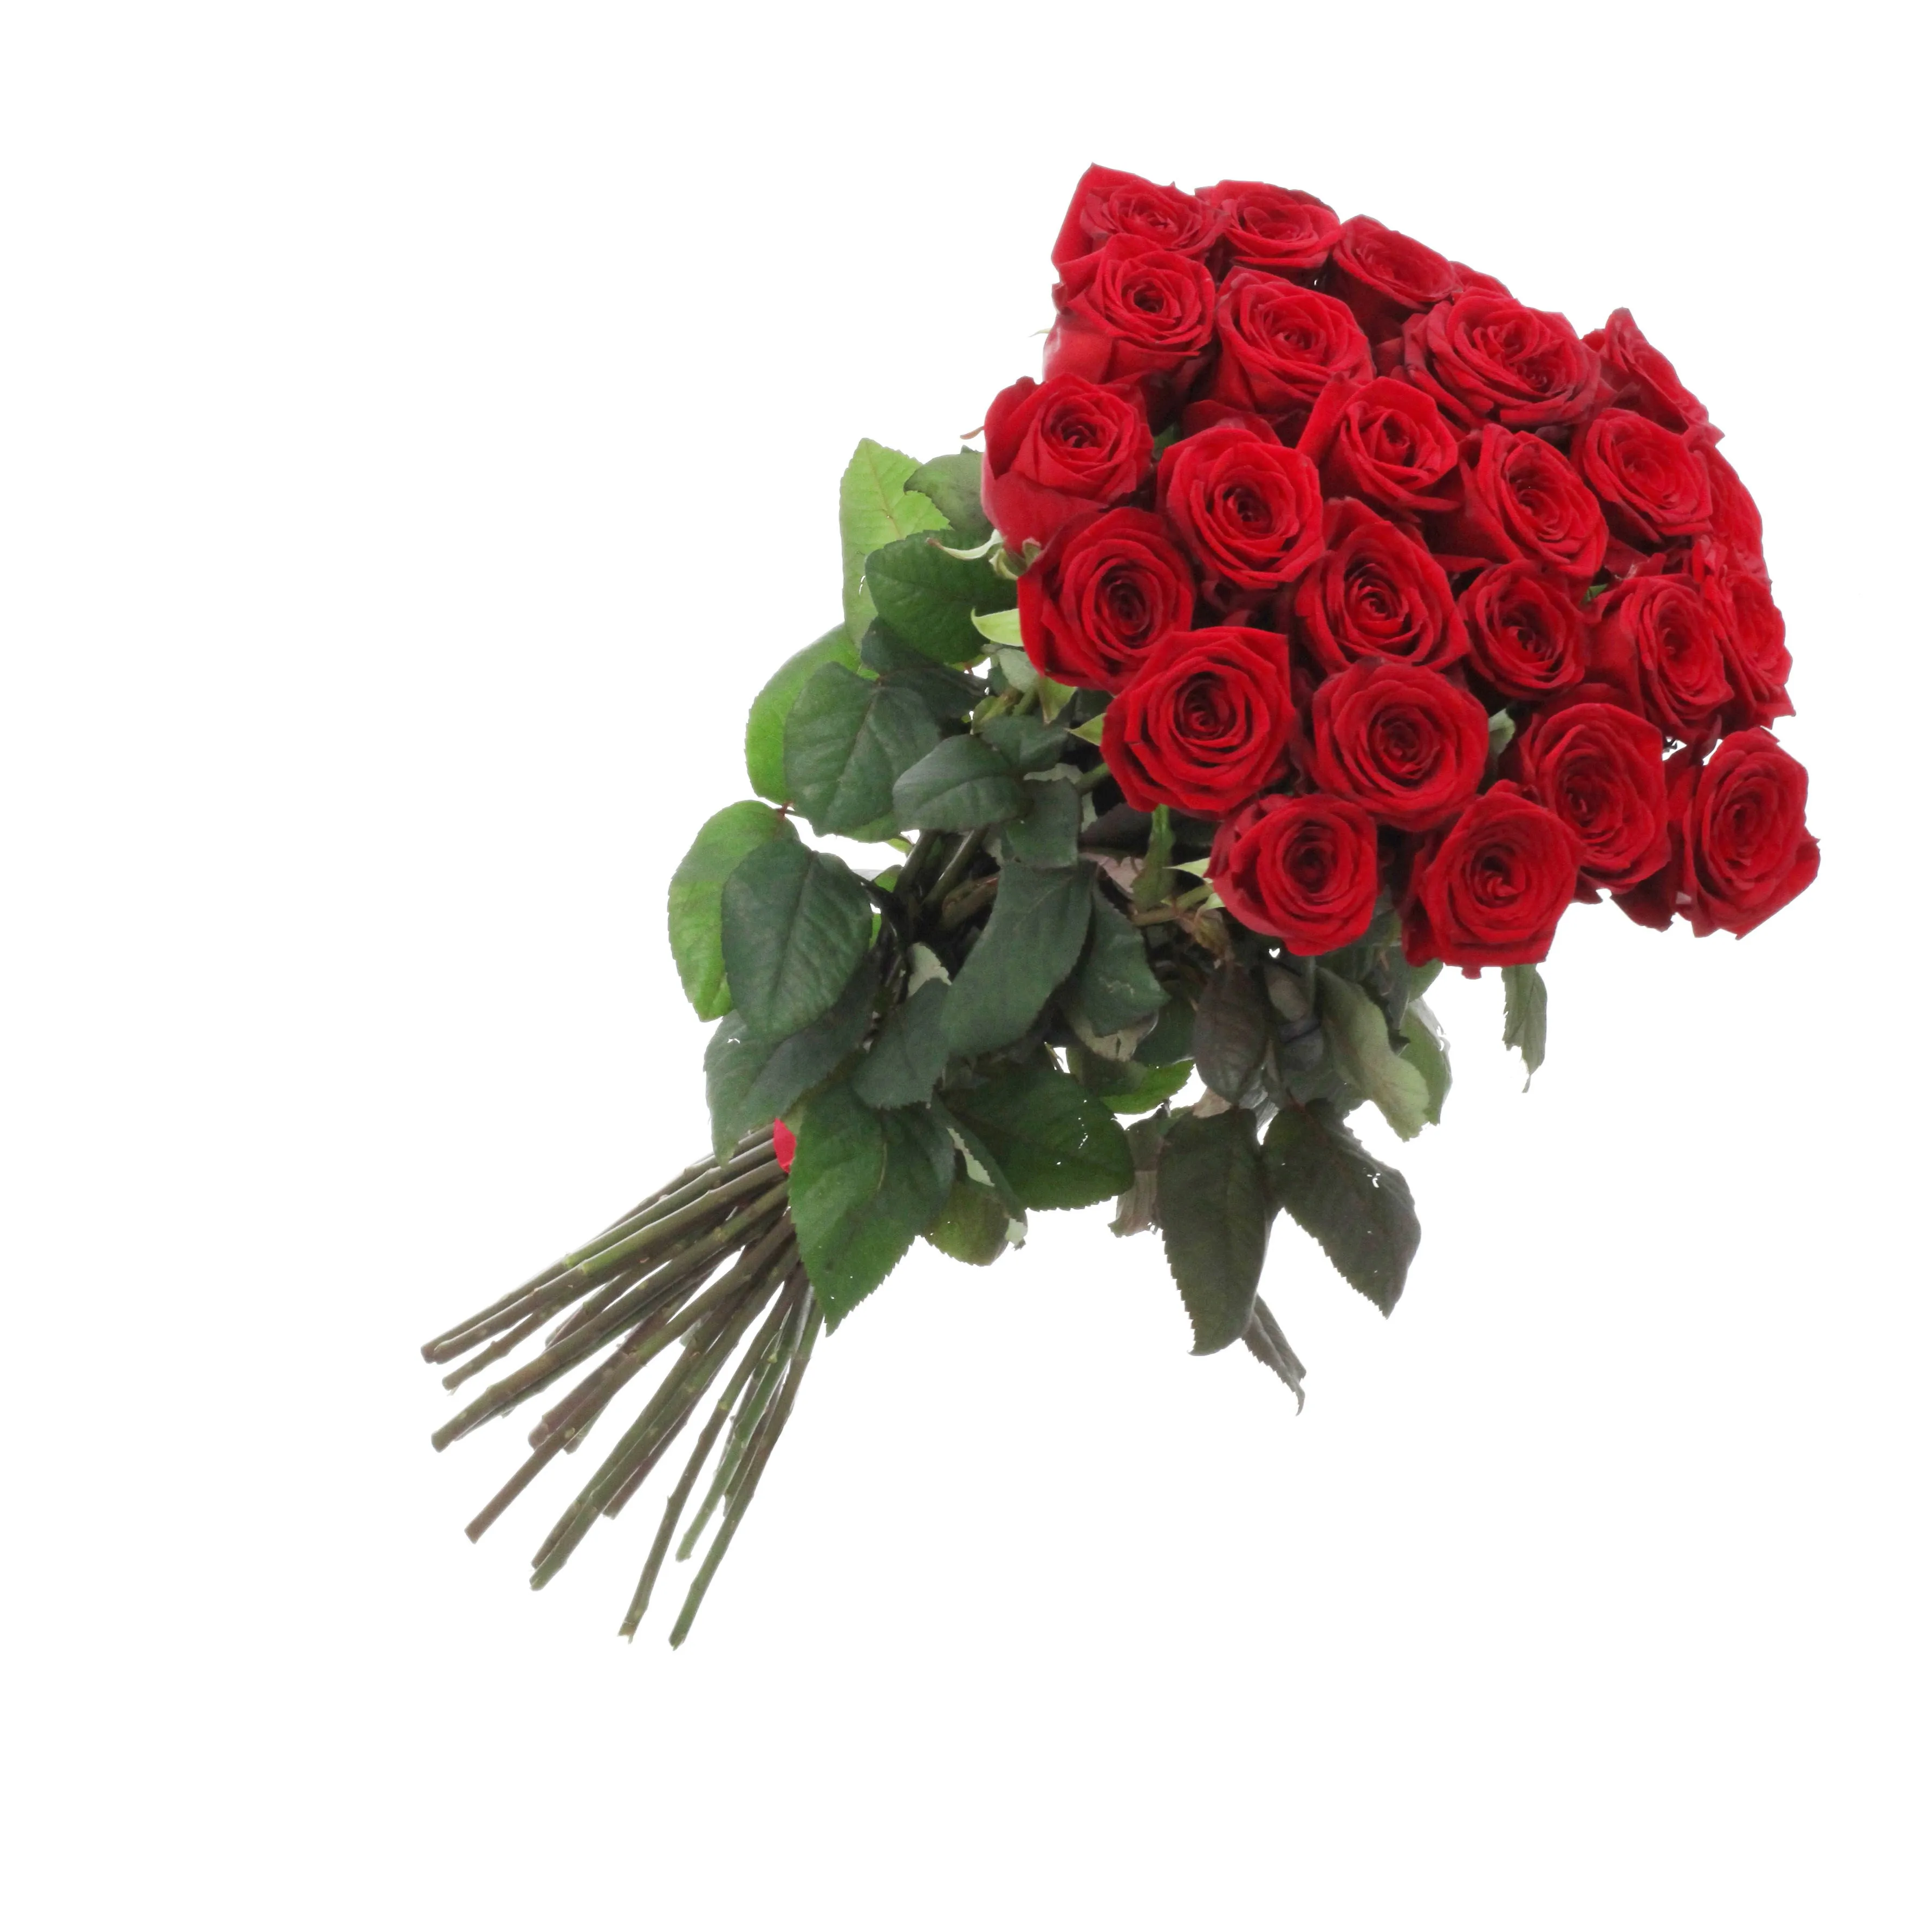 Bunch of 21 red roses - Kyrgyzstan